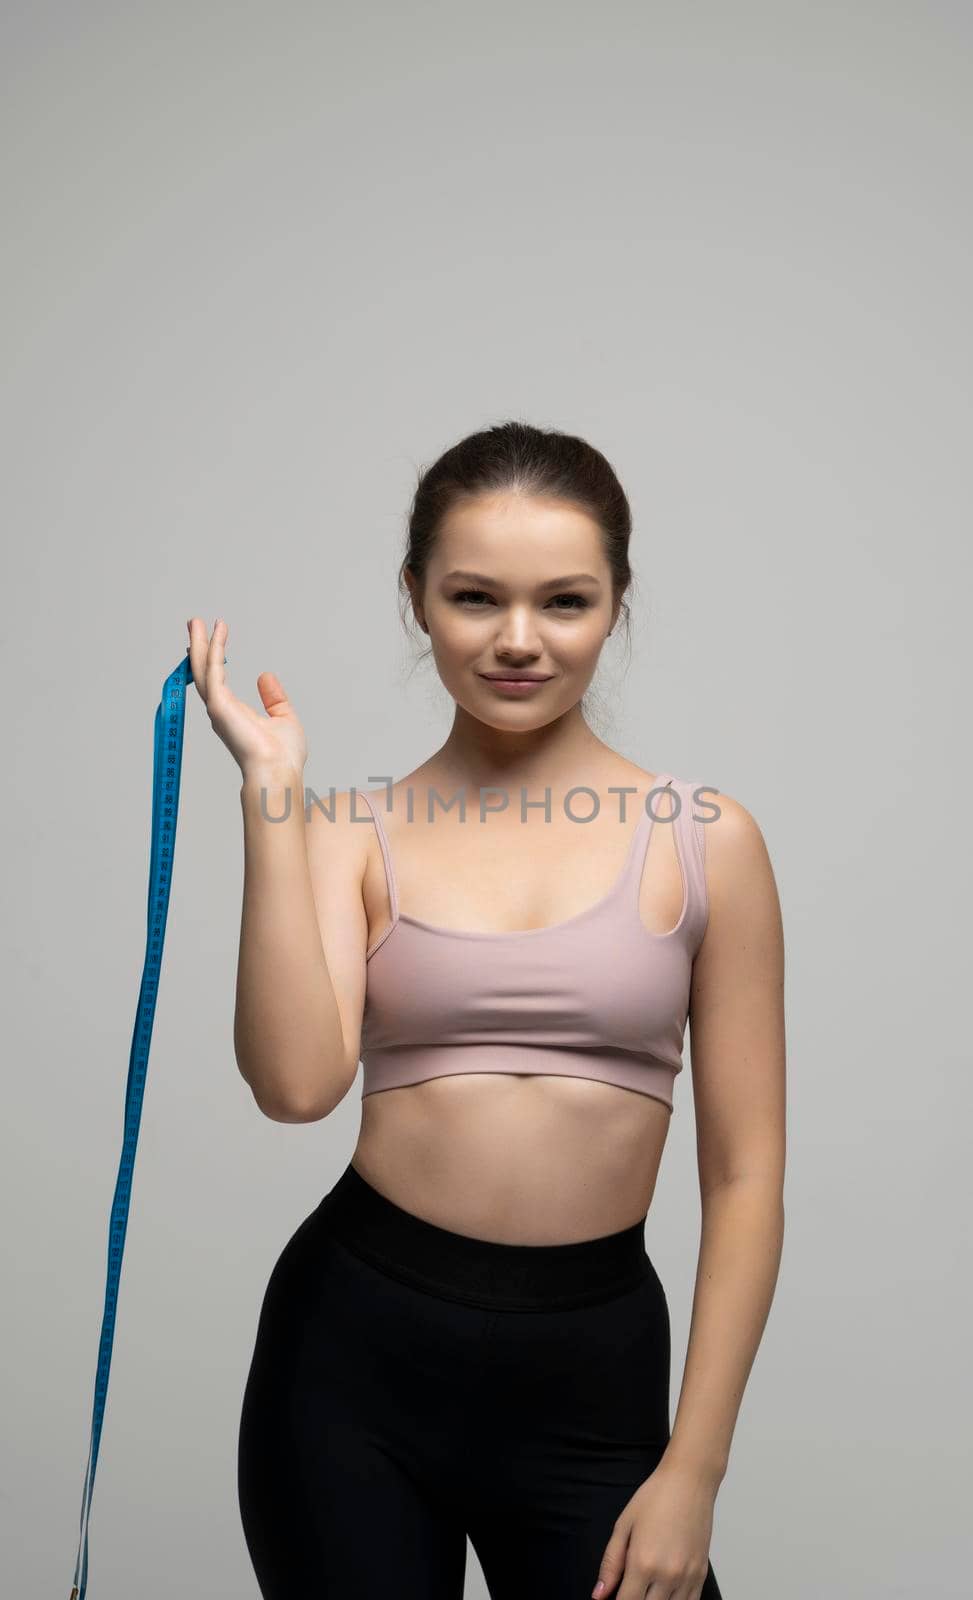 Young brunette woman in fitness outfit holding a blue measure tape and looking in a camera